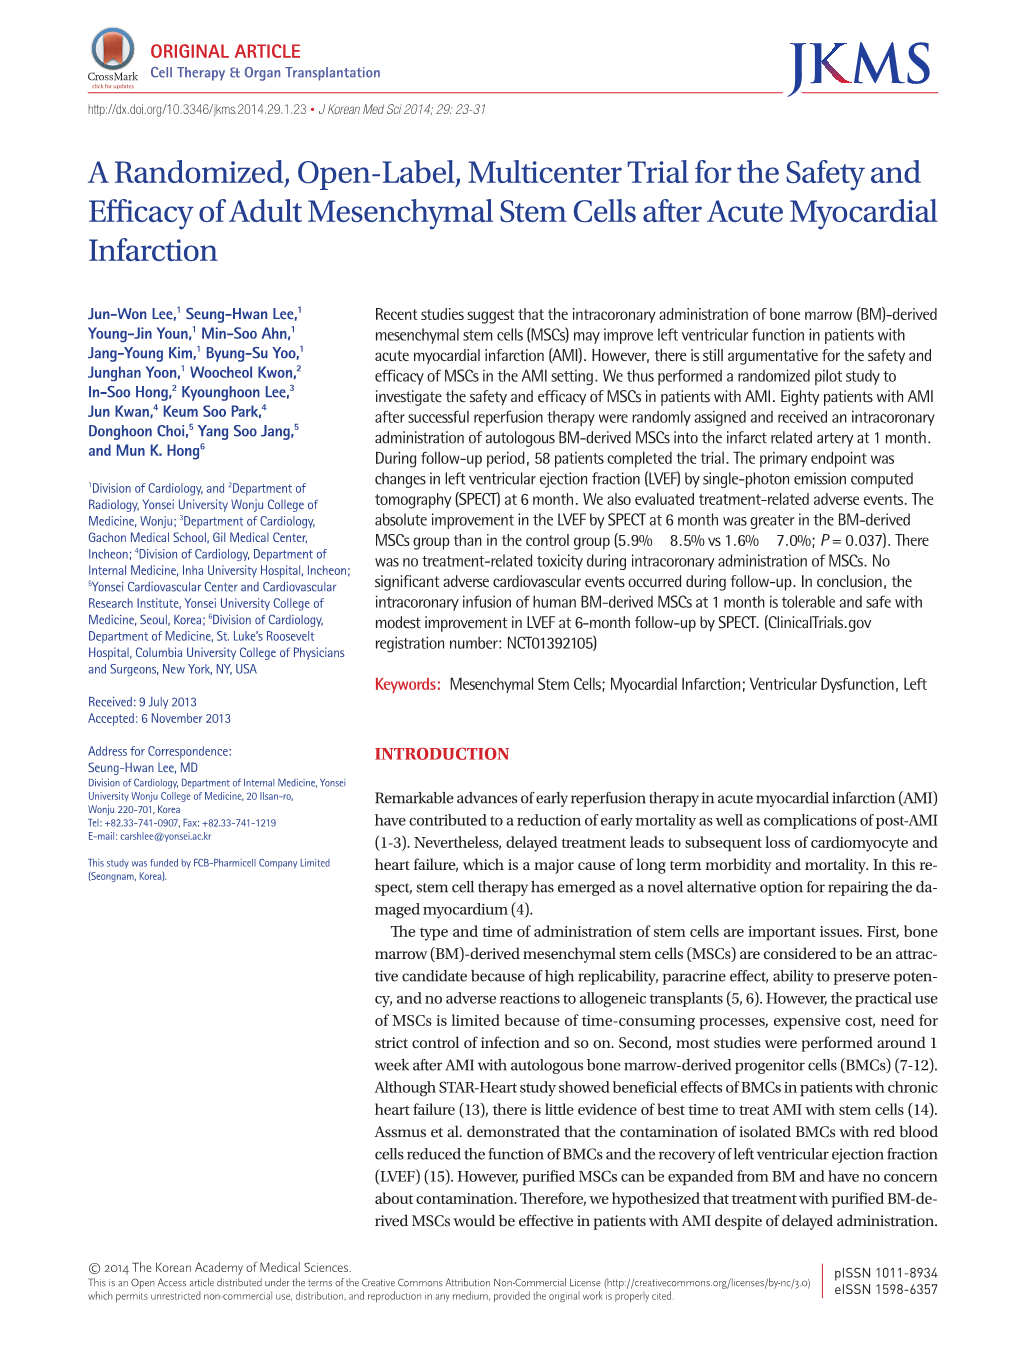 A Randomized, Open-Label, Multicenter Trial for the Safety and Efficacy of Adult Mesenchymal Stem Cells After Acute Myocardial Infarction